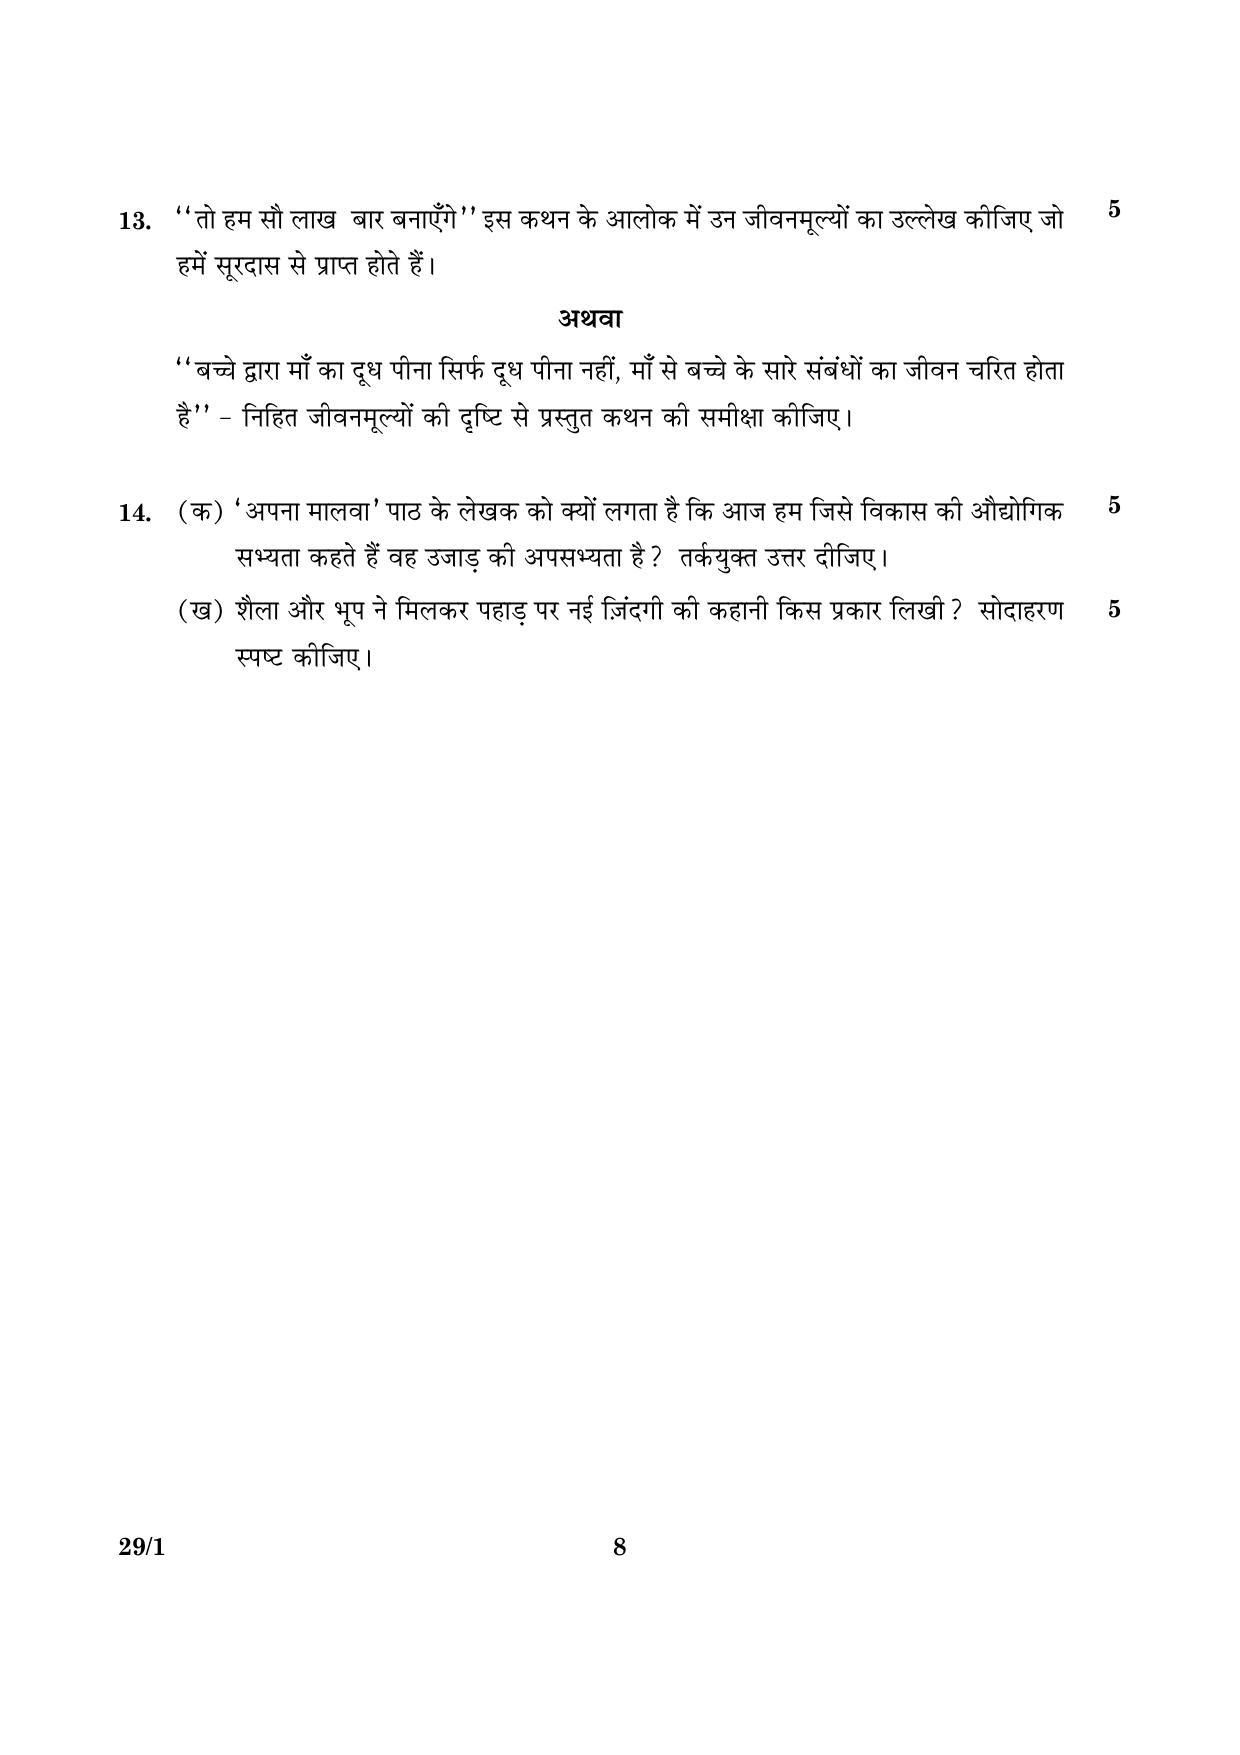 CBSE Class 12 029 Set 1 Hindi Elective 2016 Question Paper - Page 8